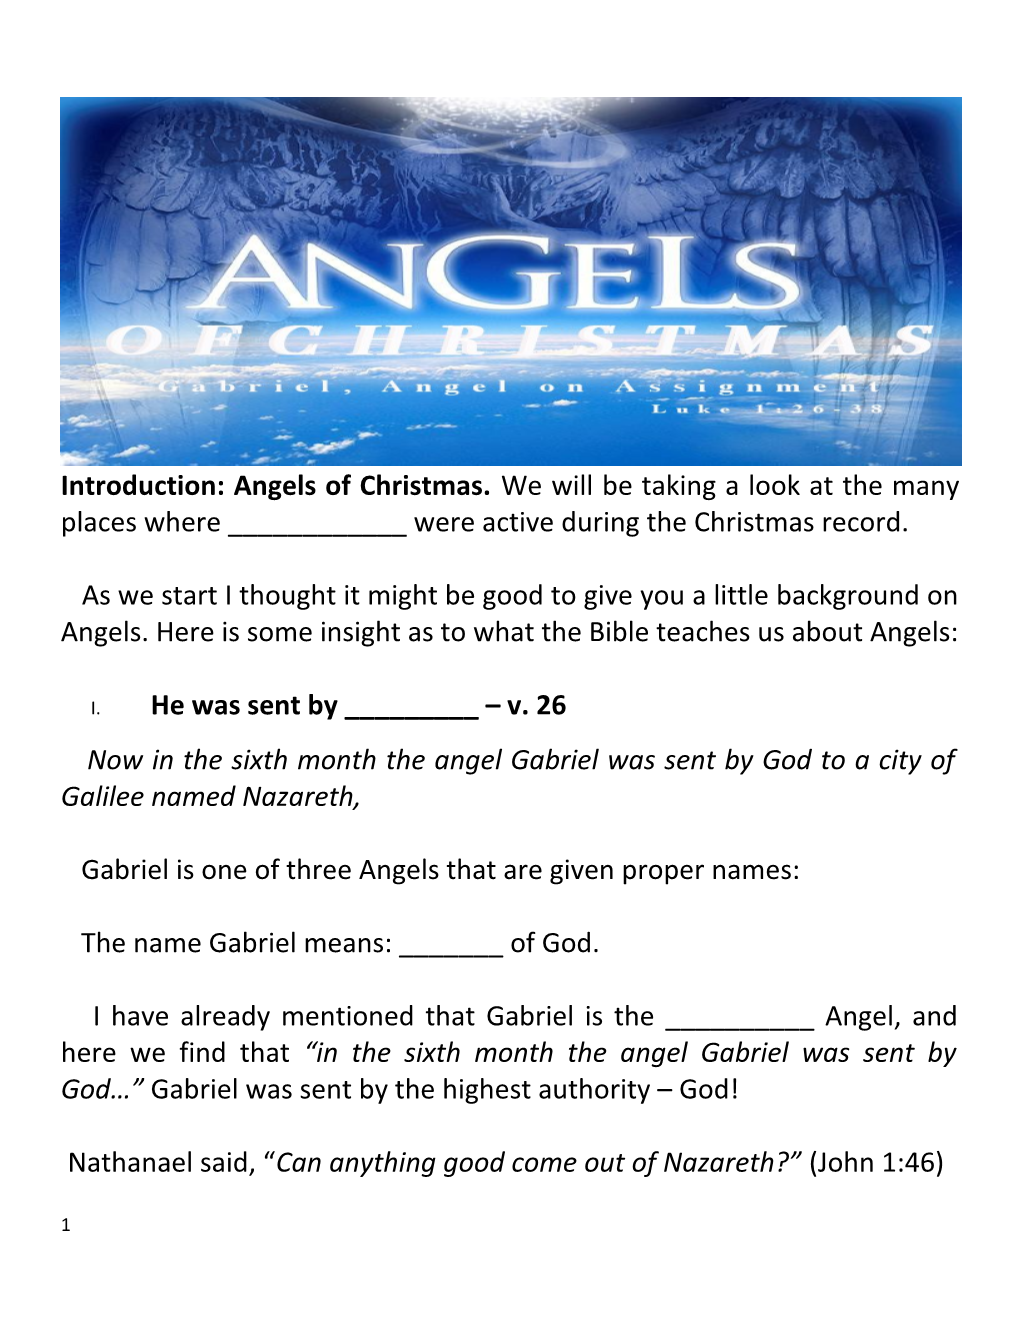 Introduction: Angels of Christmas. We Will Be Taking a Look at the Many Places Where ______Were